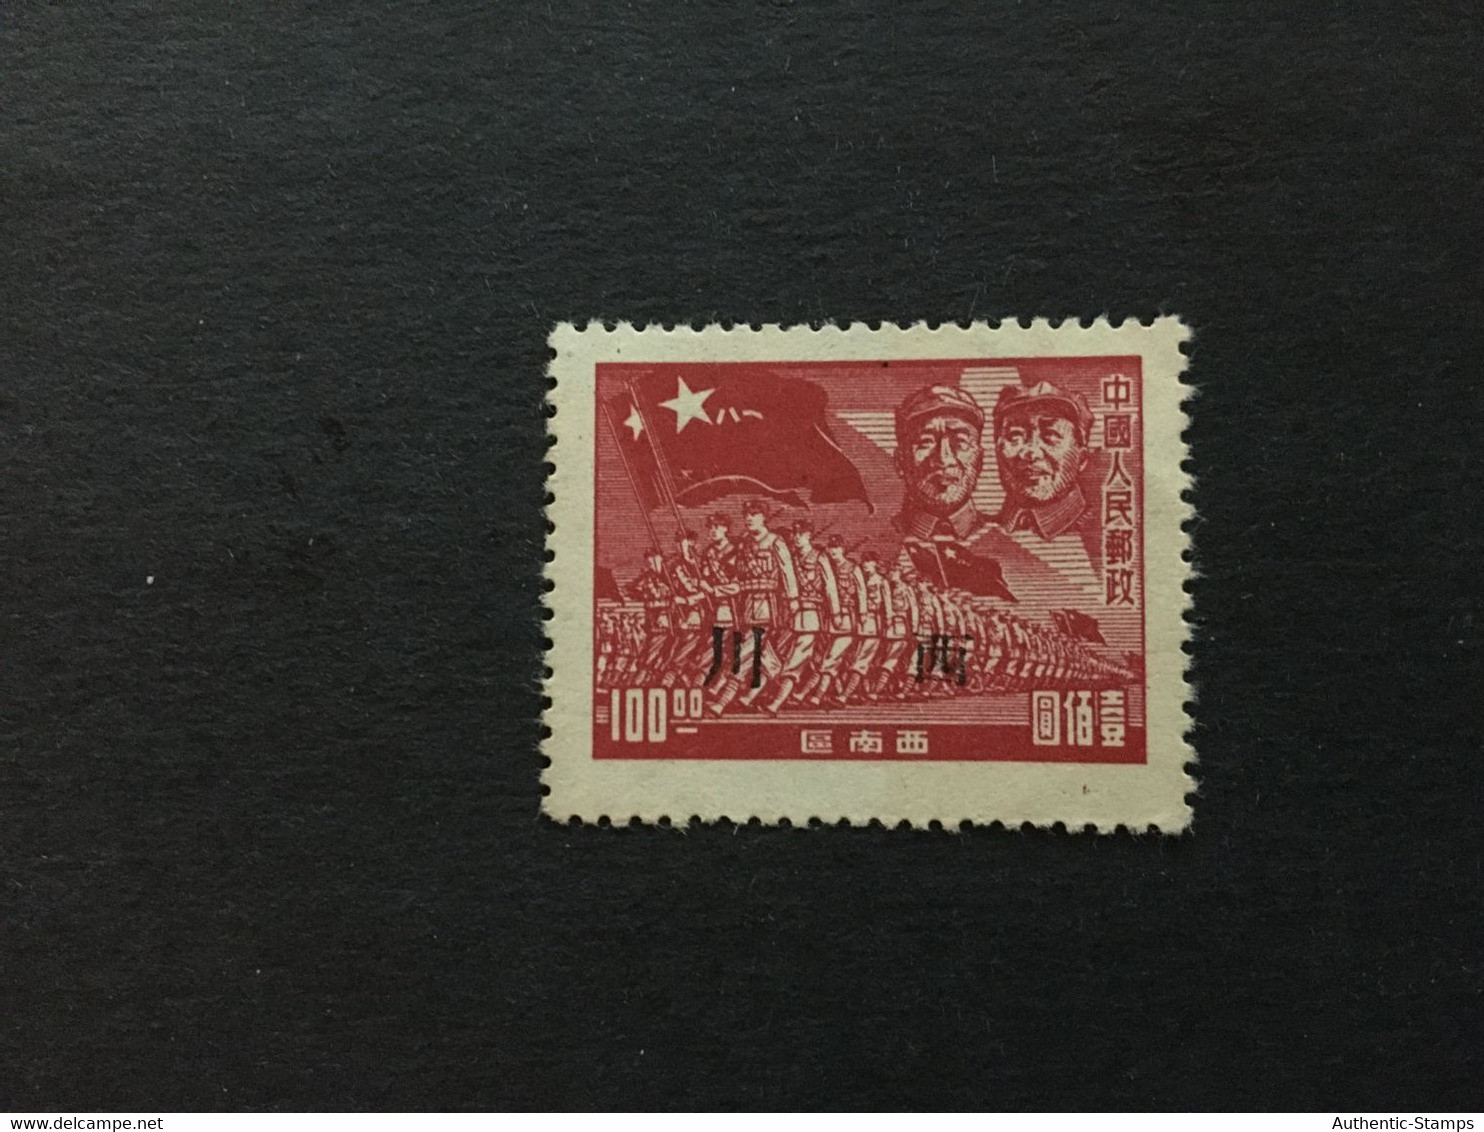 1950  CHINA  STAMP, Rare Overprint, Western Sichuan, TIMBRO, STEMPEL, UnUSED, CINA, CHINE, LIST 2957 - South-Western China 1949-50